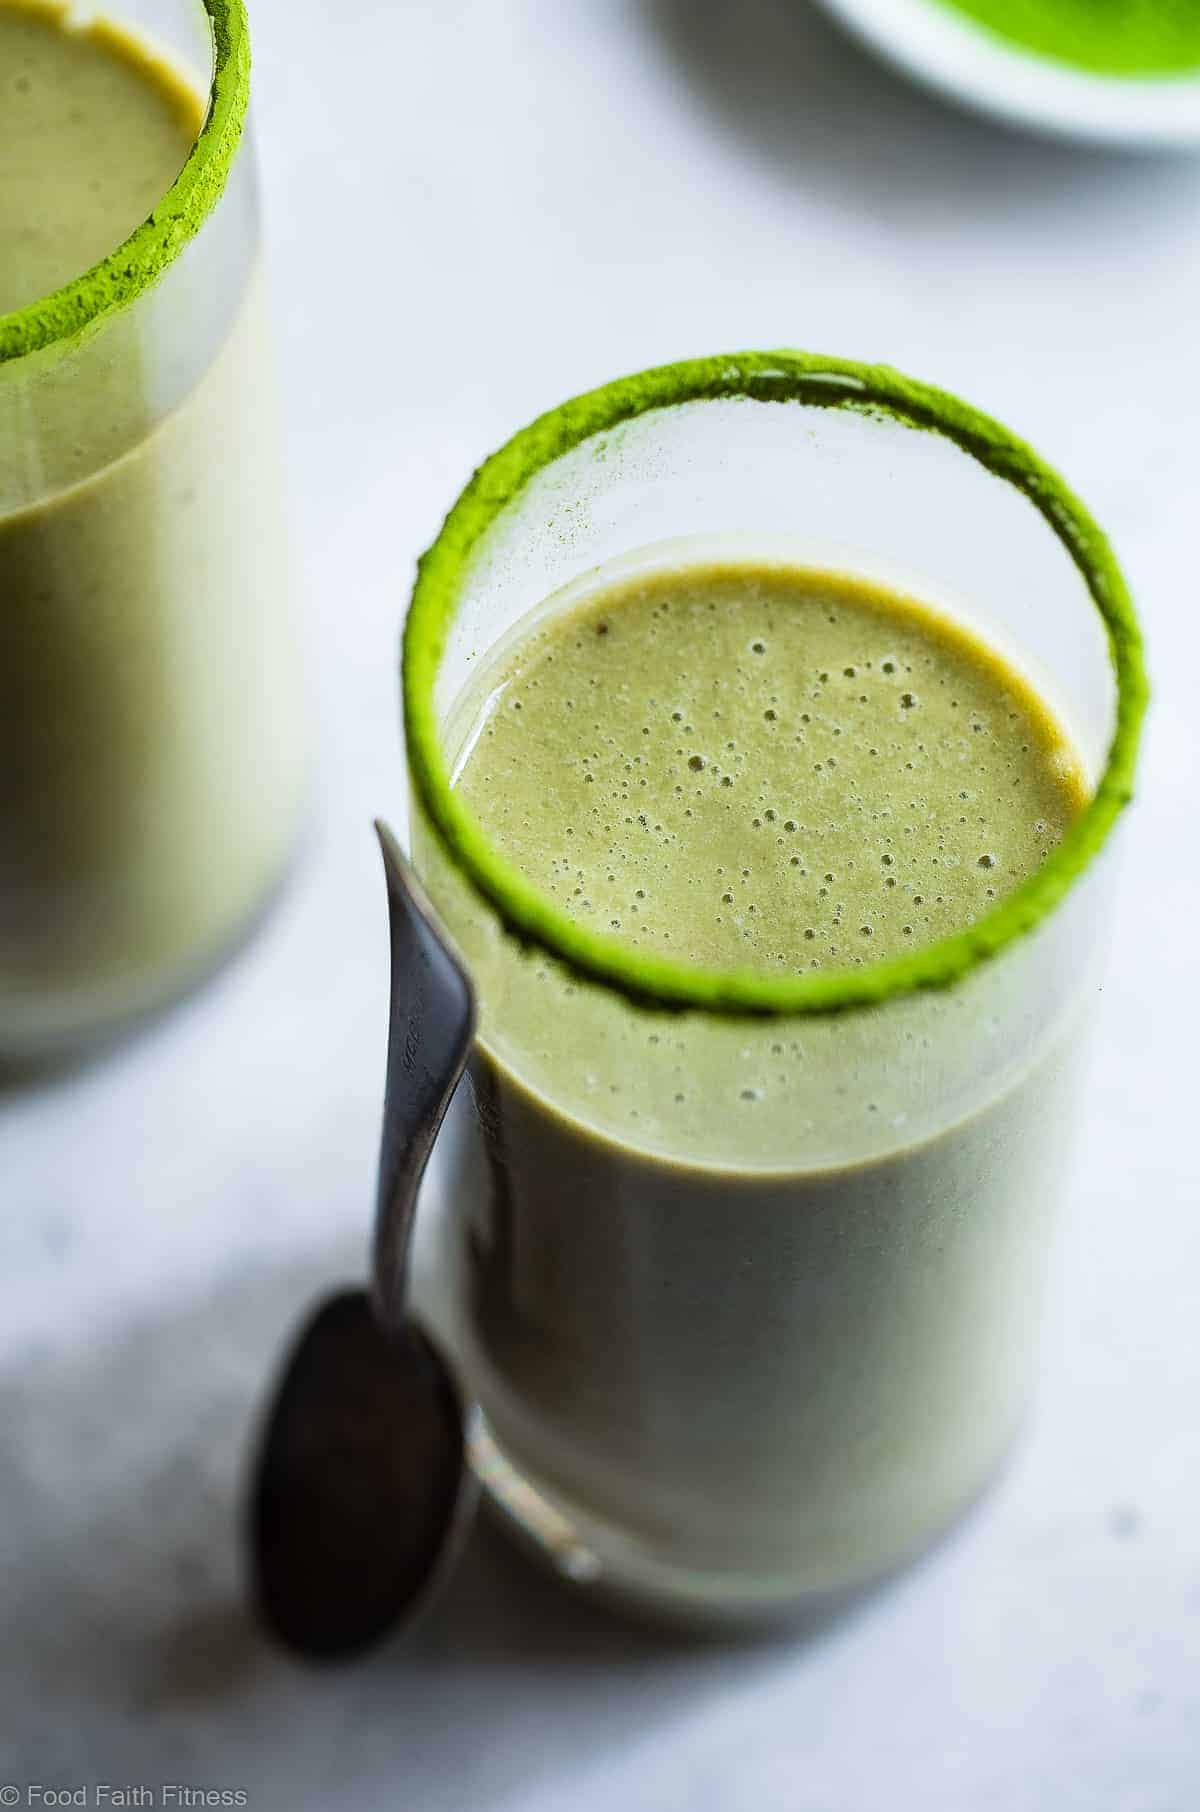 Vegan Banana Matcha Smoothie - This 3 ingredient banana smoothie is a simple, healthy breakfast or snack that will give you energy and keep you full until lunch! It's gluten free, vegan, paleo and whole30 friendly too! | #Foodfaithfitness | #Vegan #Healthy #Paleo #Whole30 #Glutenfree